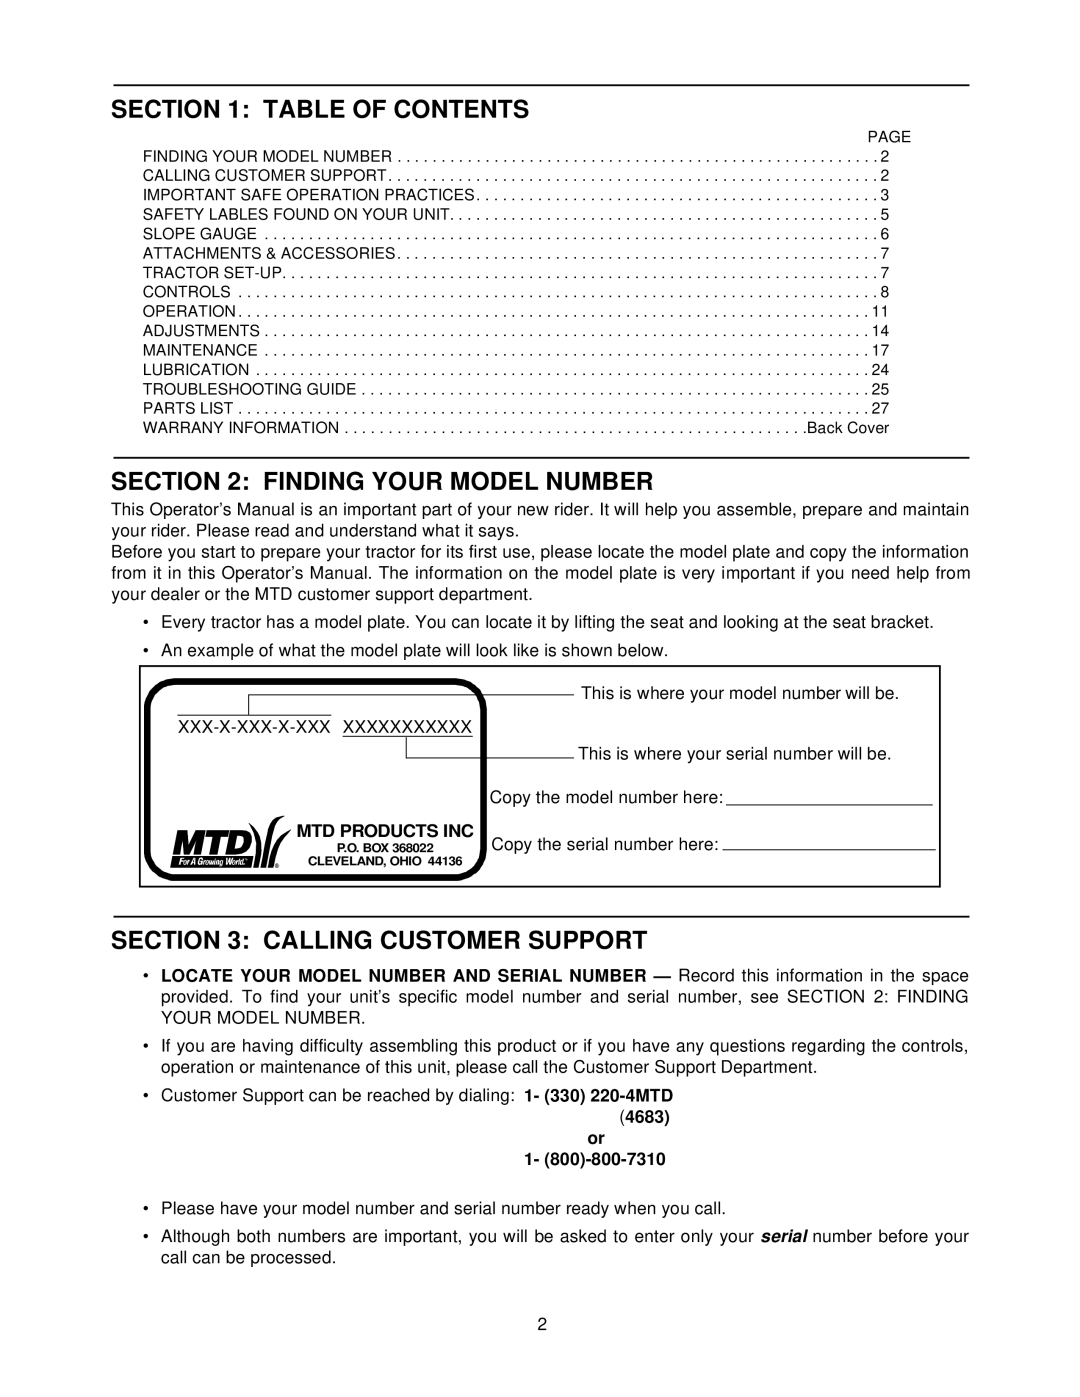 Troy-Bilt 604 manual Table Of Contents, Finding Your Model Number, Calling Customer Support, Mtd Products Inc, 4683 or 